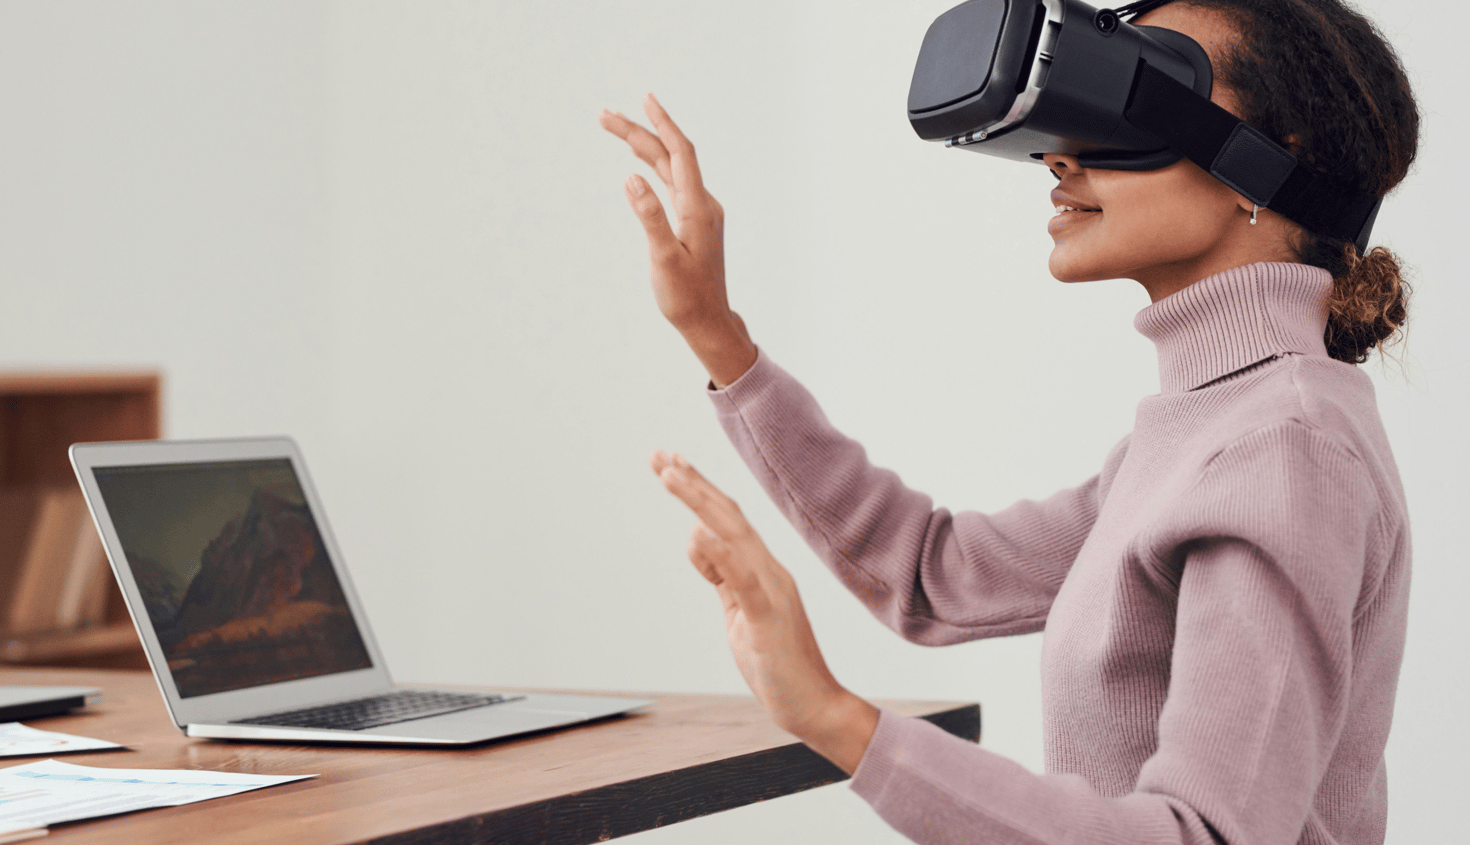 How Brands Use AR, VR and IoT to Wow Their Customers